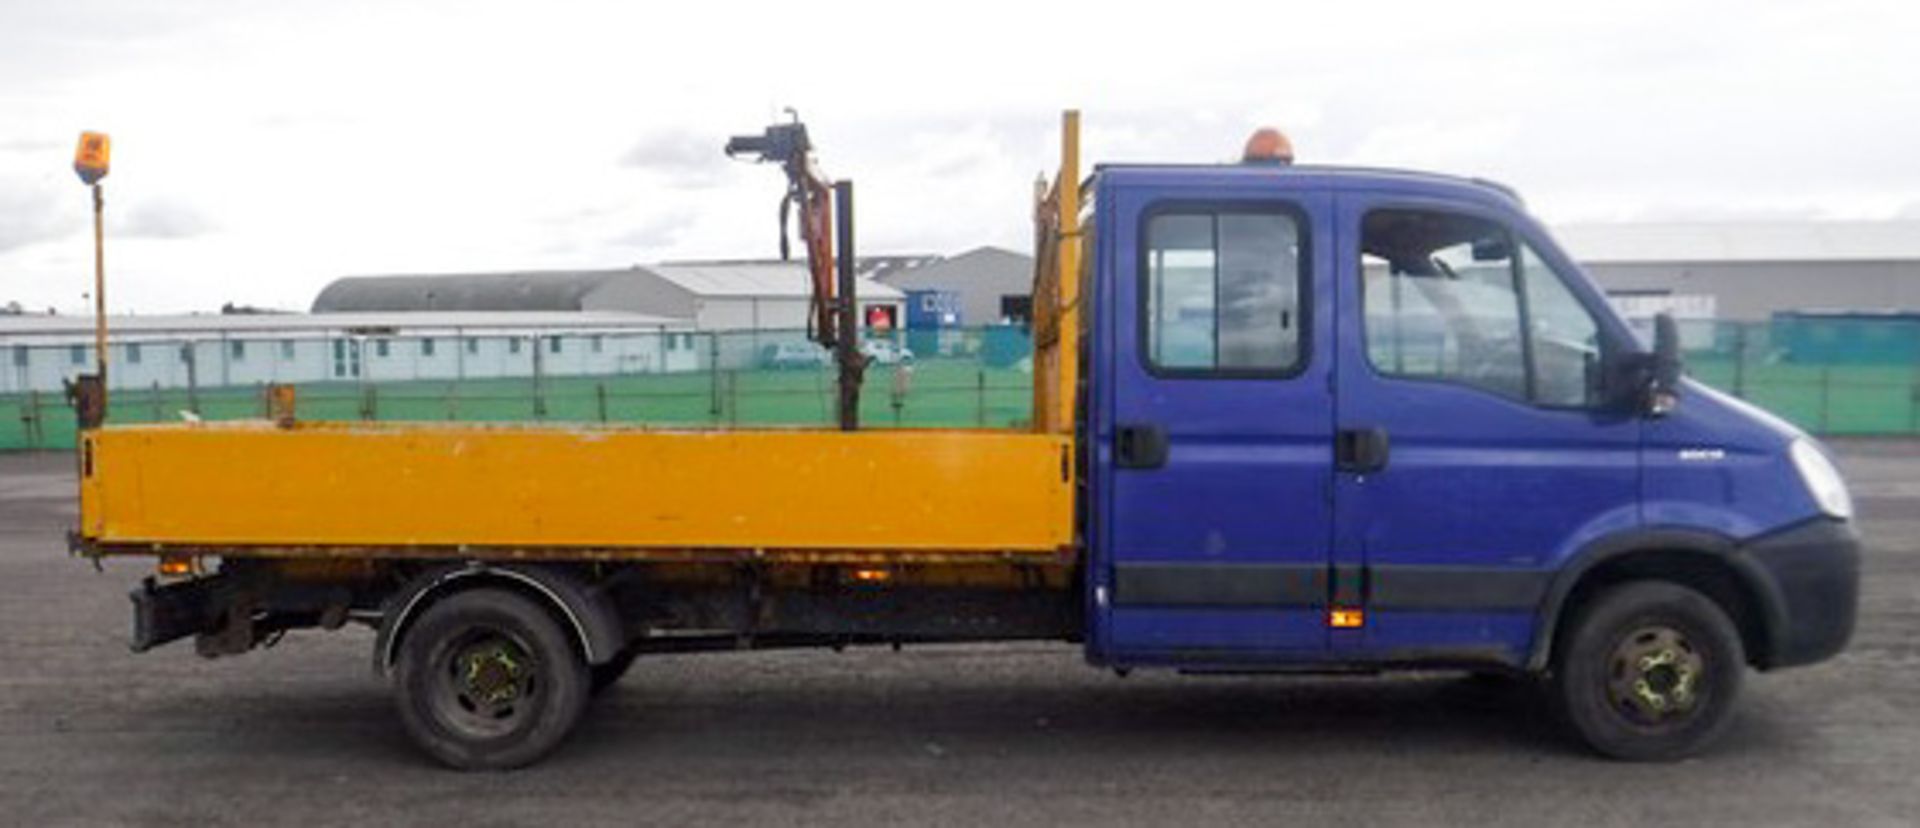 IVECO DAILY 50C15 - 2998cc - Image 15 of 20